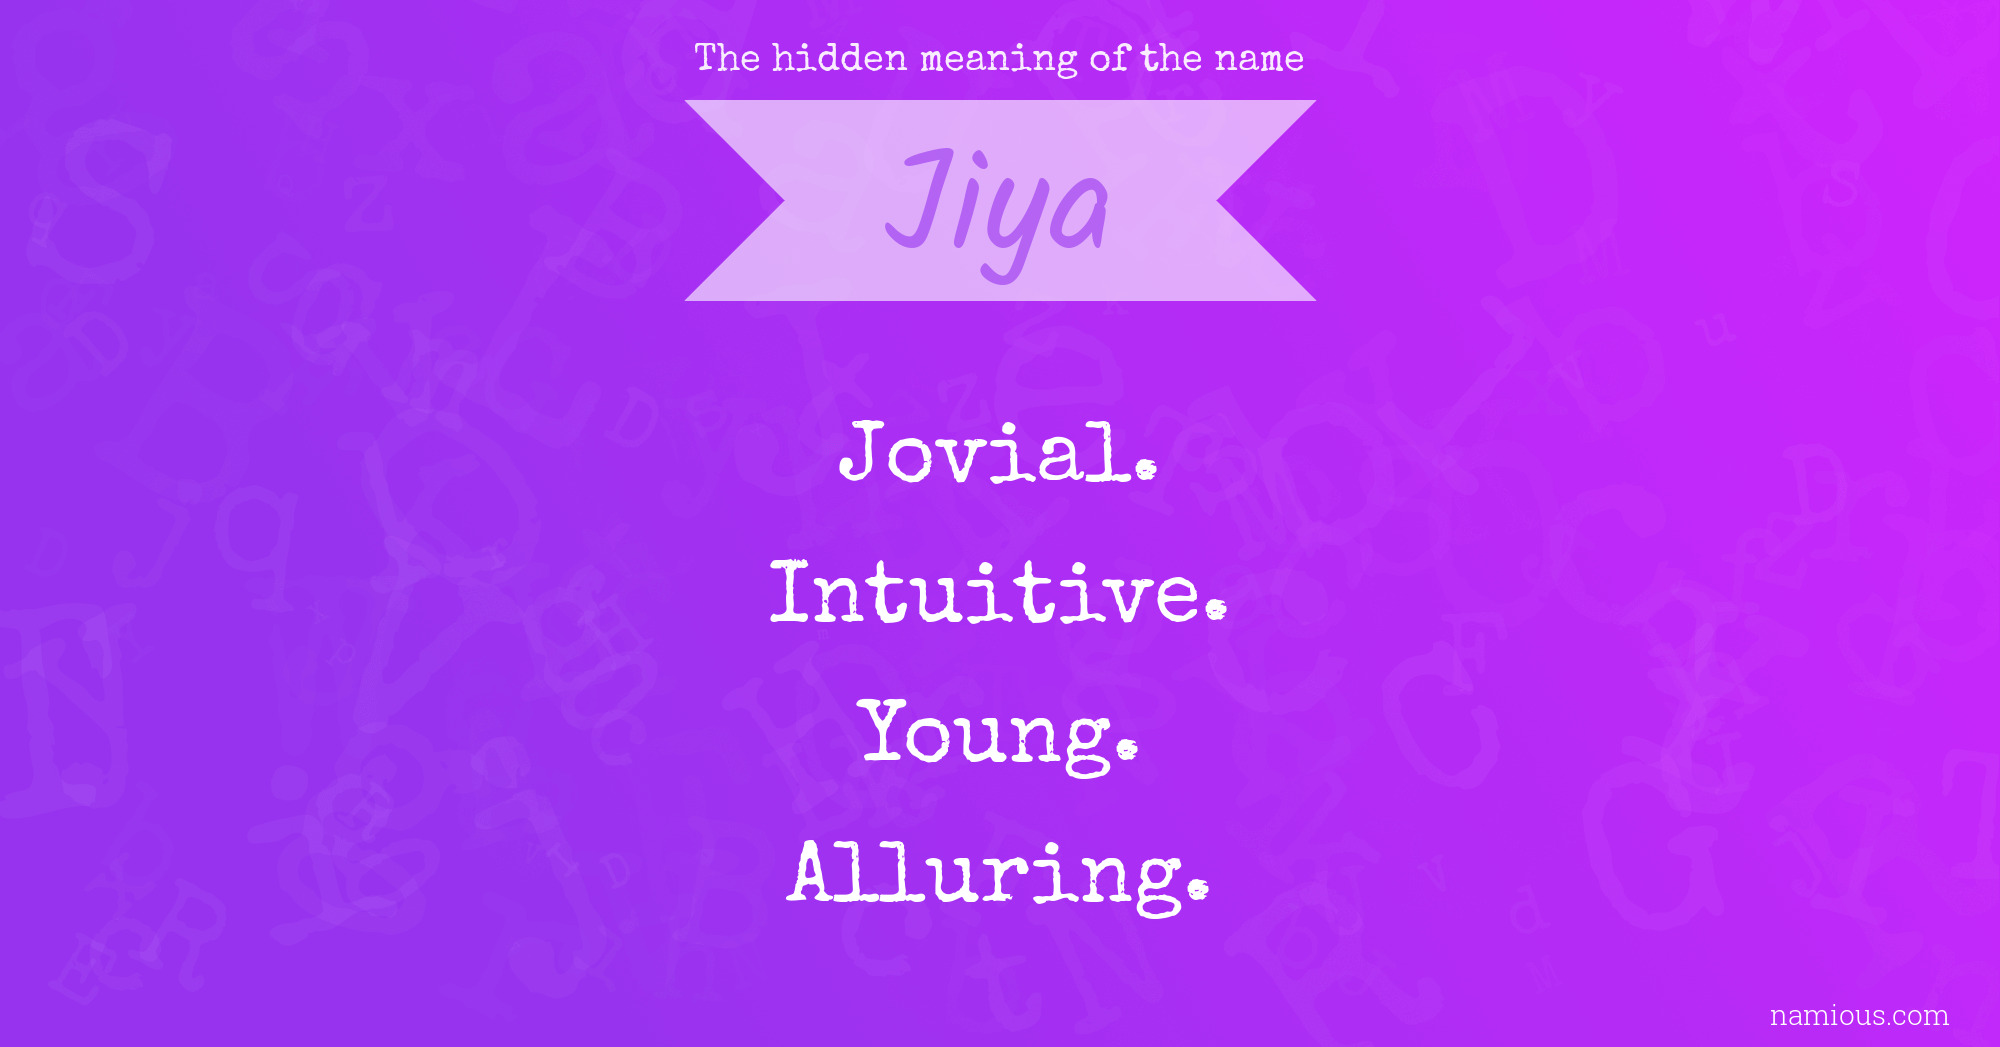 The hidden meaning of the name Jiya